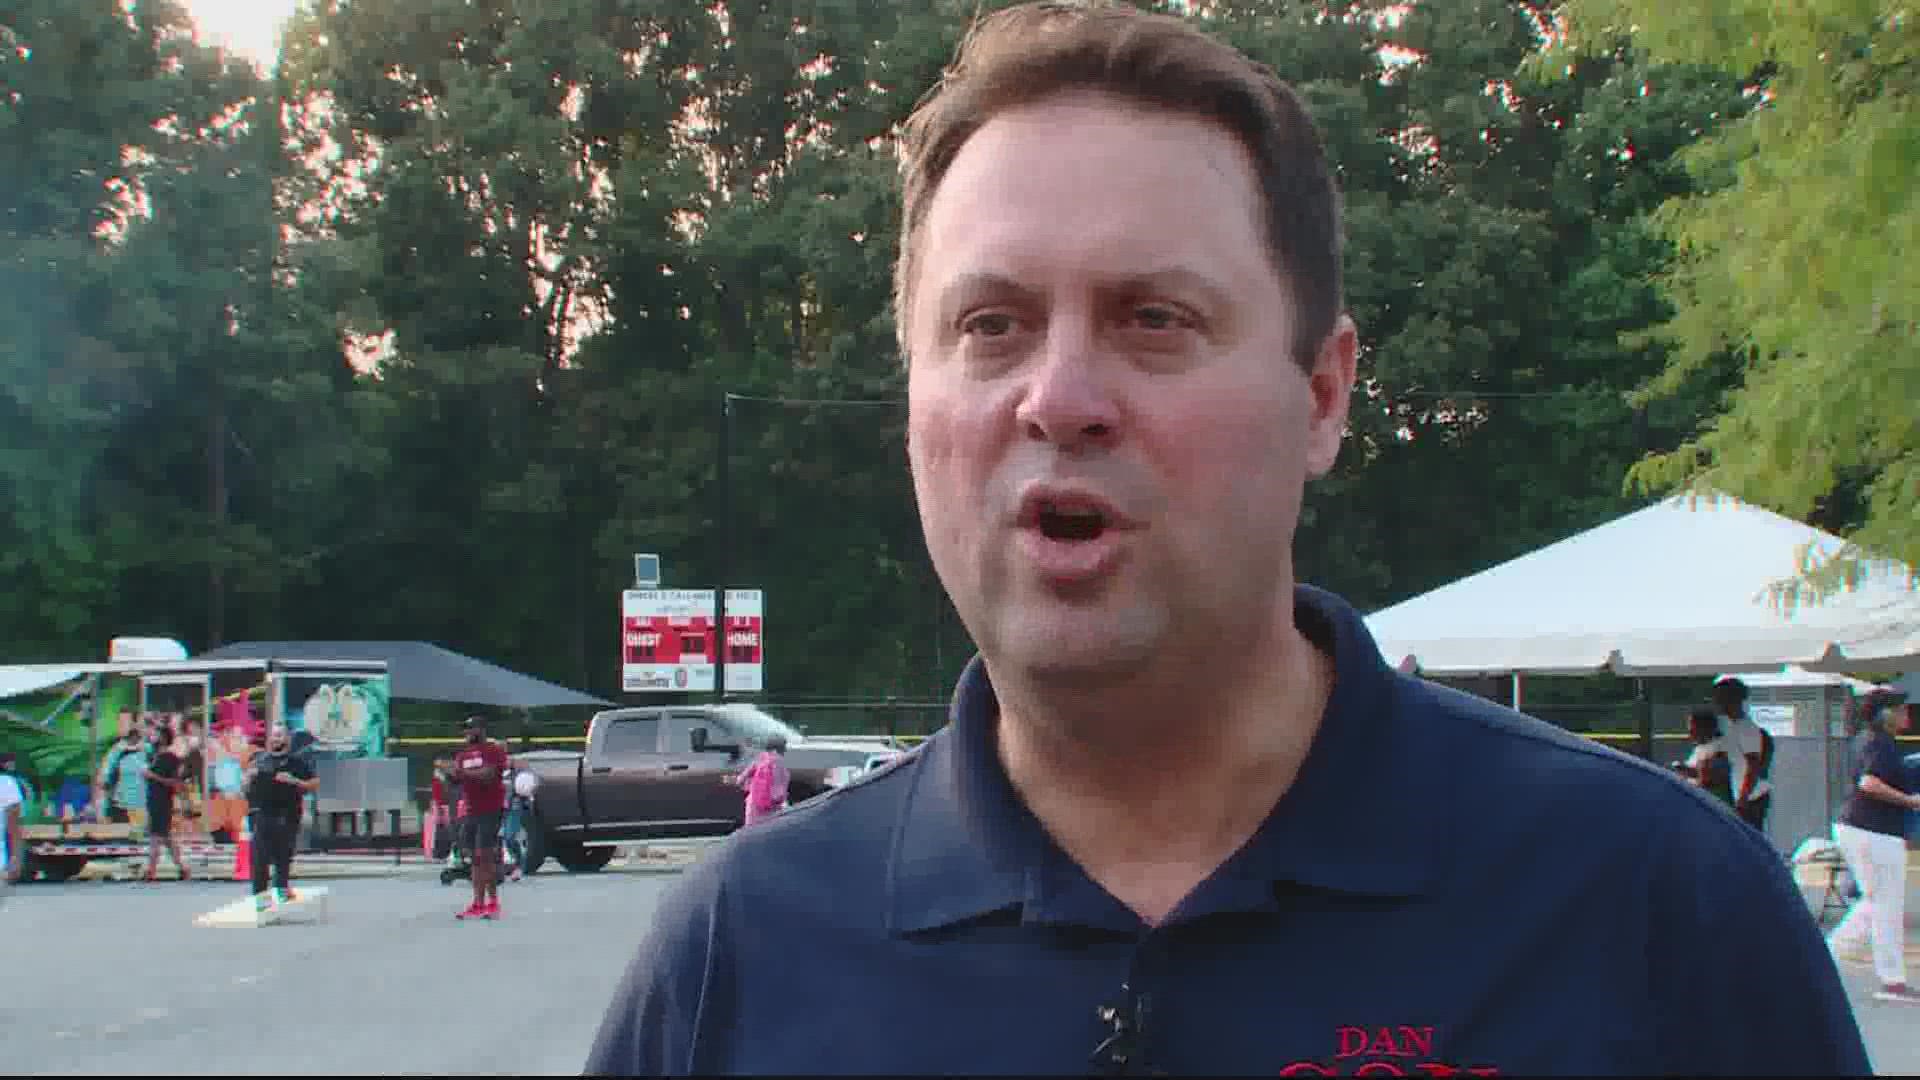 The Republican attended the Prince George’s County Police Department’s “Back to School” celebration in Palmer Park.